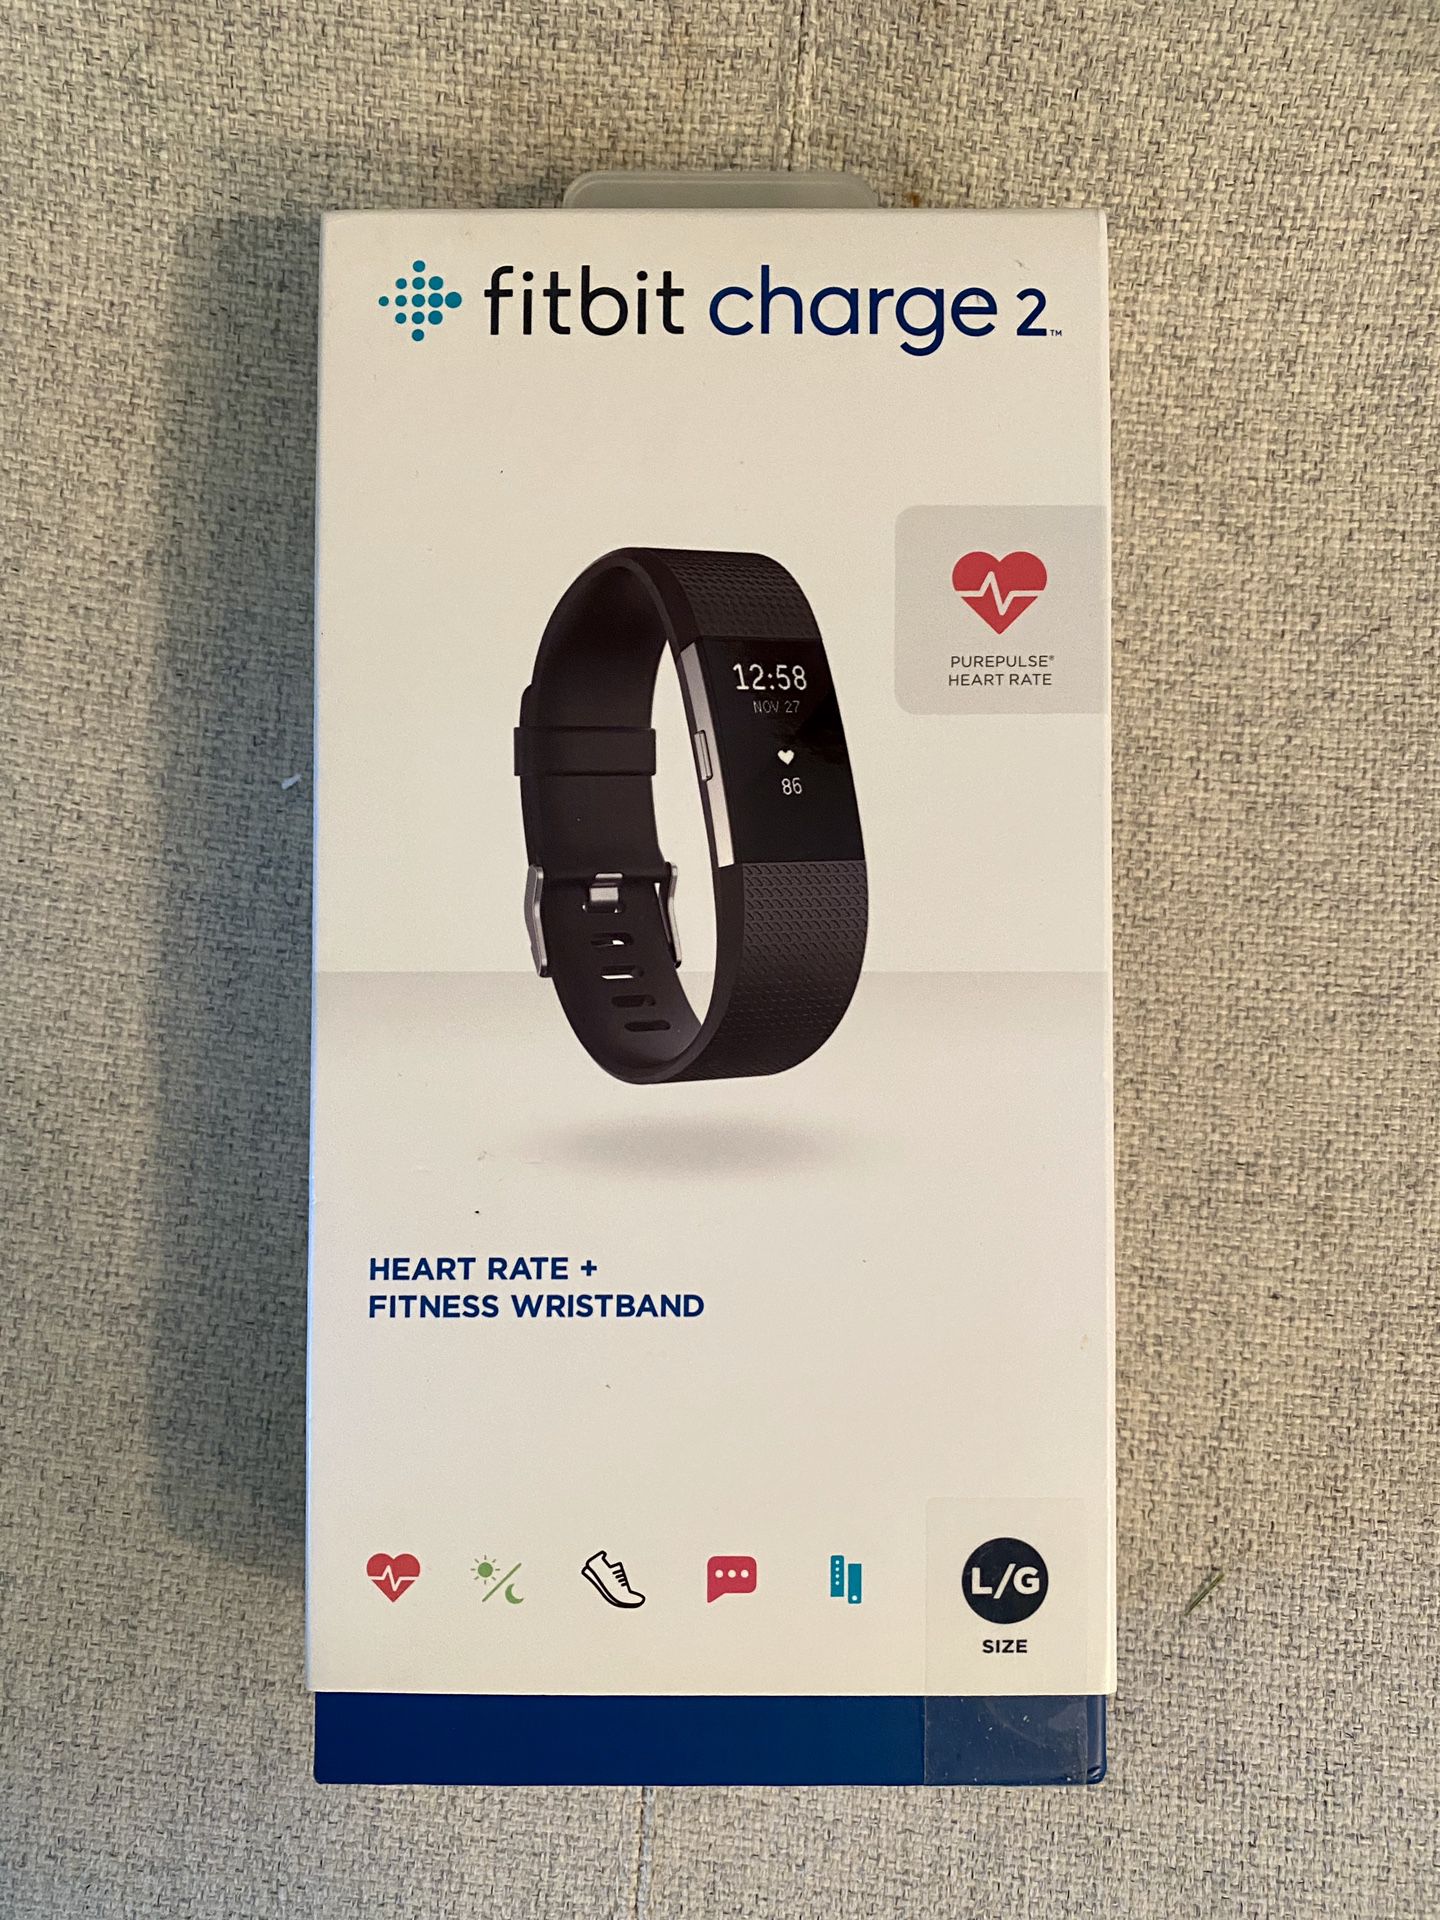 Brand New Fitbit Charge 2 size L/G Stainless Steel Tracker Black Band